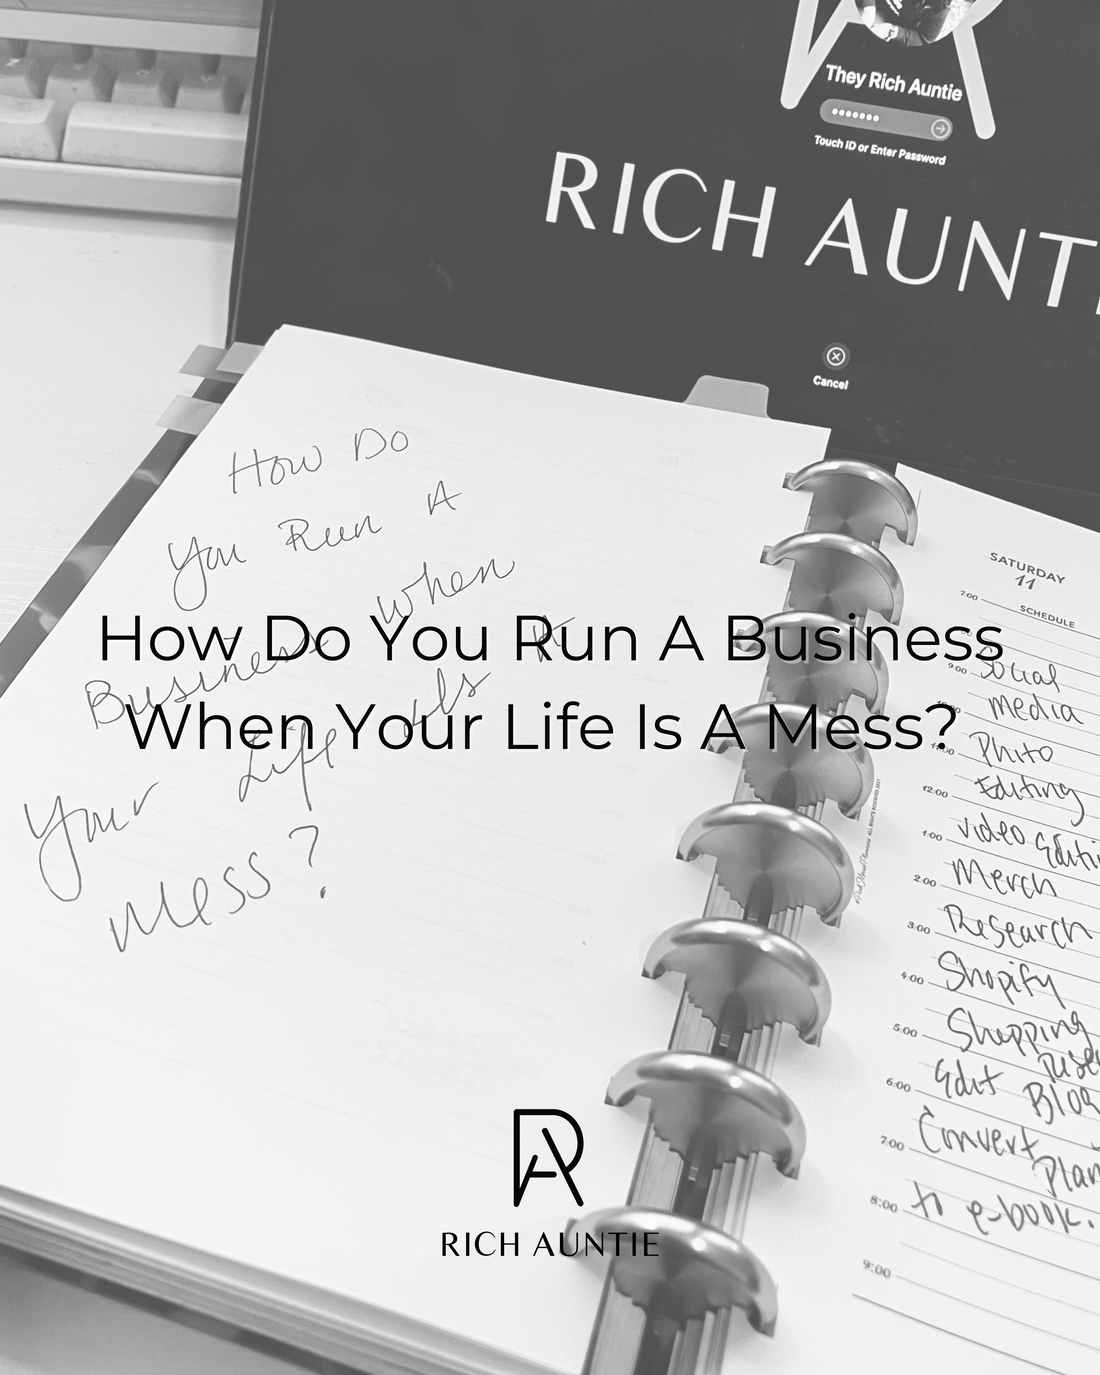 How Do You Run A Business When Your Life Is A Mess?